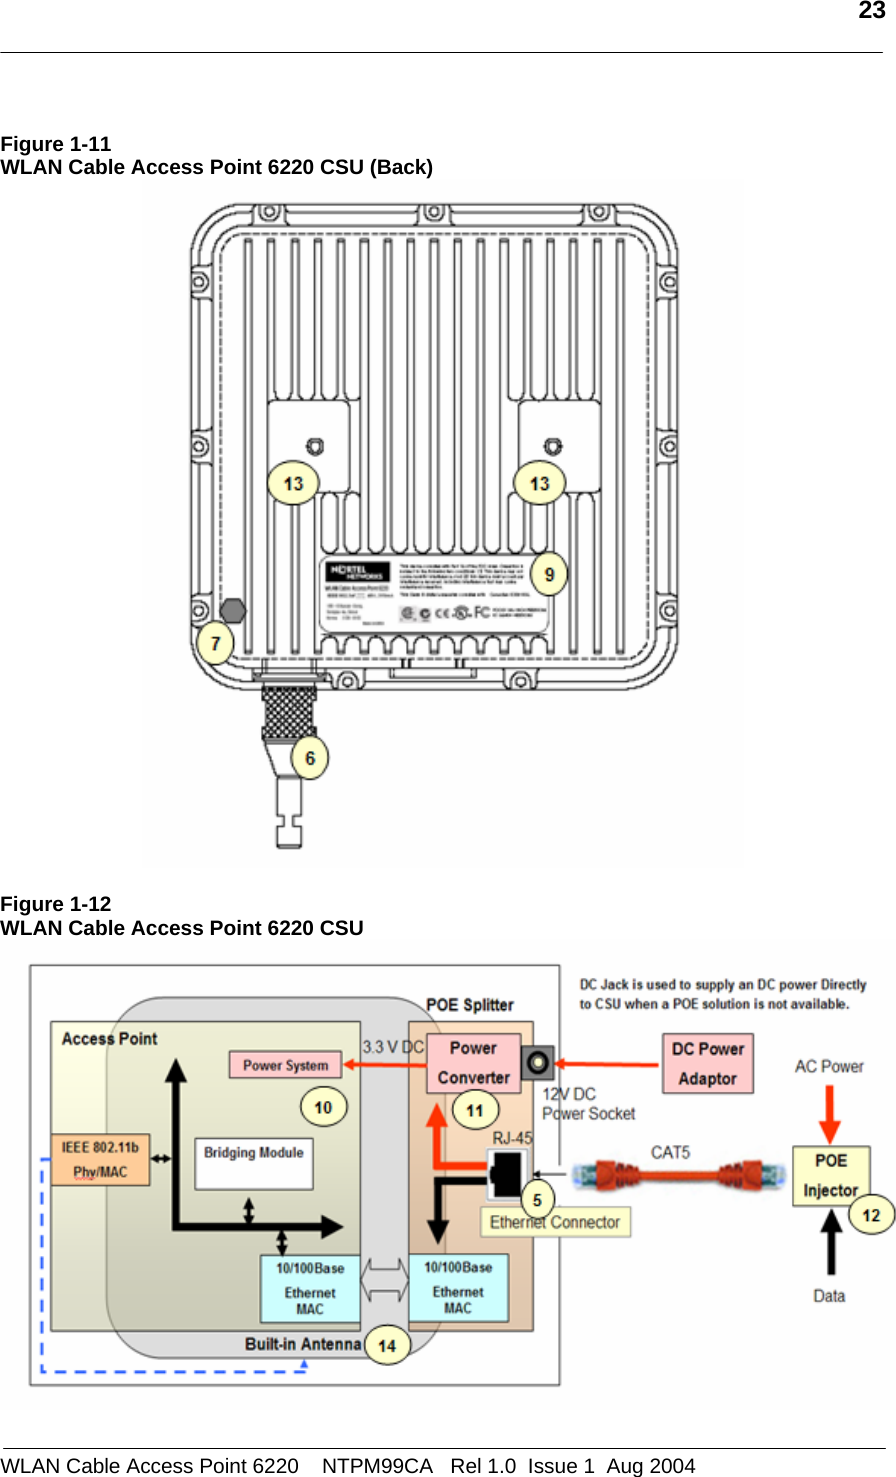   23   Figure 1-11  WLAN Cable Access Point 6220 CSU (Back)   Figure 1-12 WLAN Cable Access Point 6220 CSU   WLAN Cable Access Point 6220    NTPM99CA   Rel 1.0  Issue 1  Aug 2004 